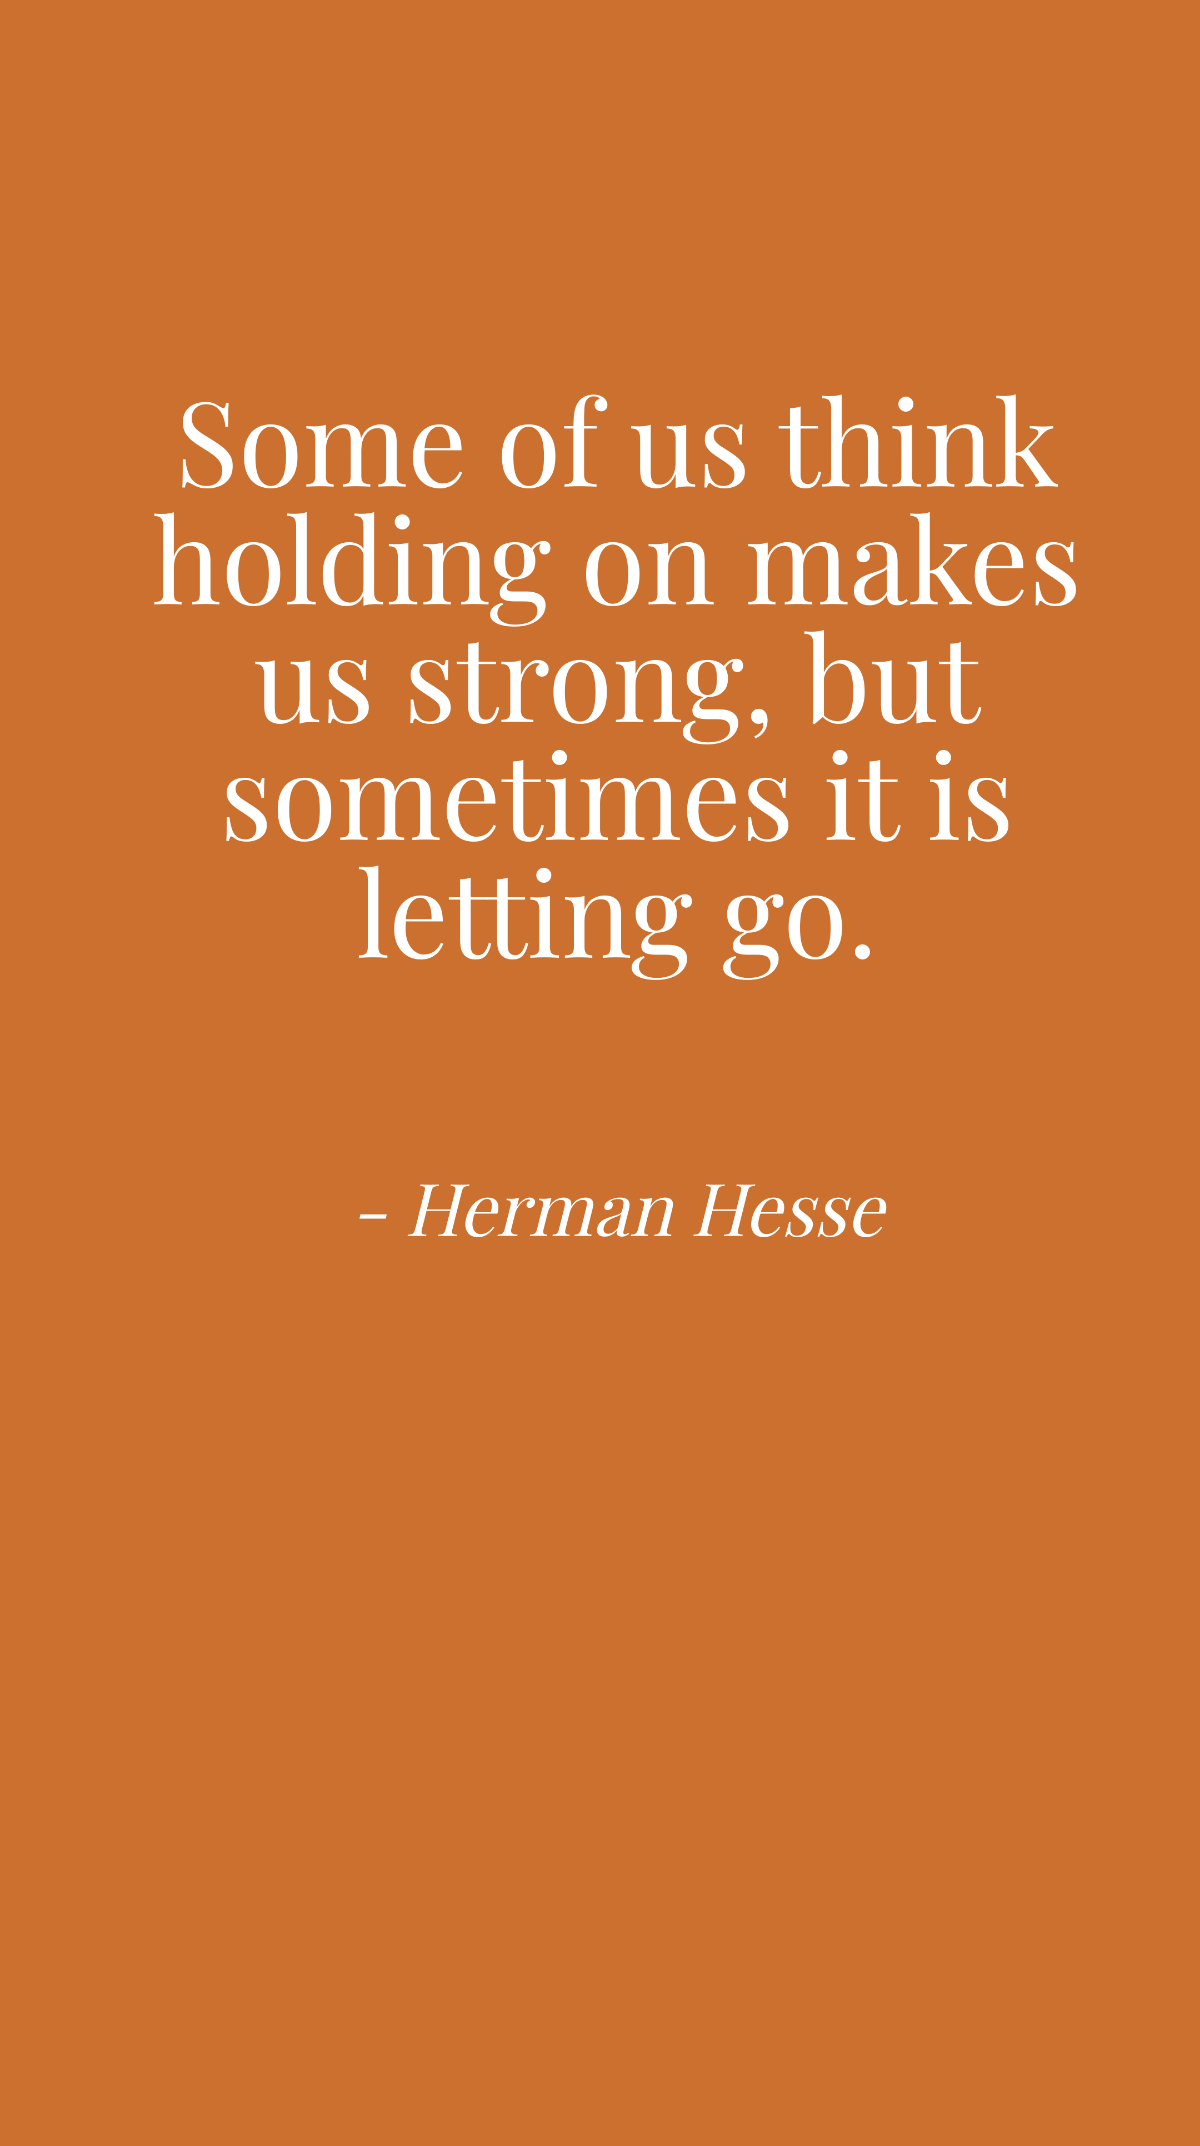 Free Herman Hesse - Some of us think holding on makes us strong, but sometimes it is letting go. Template